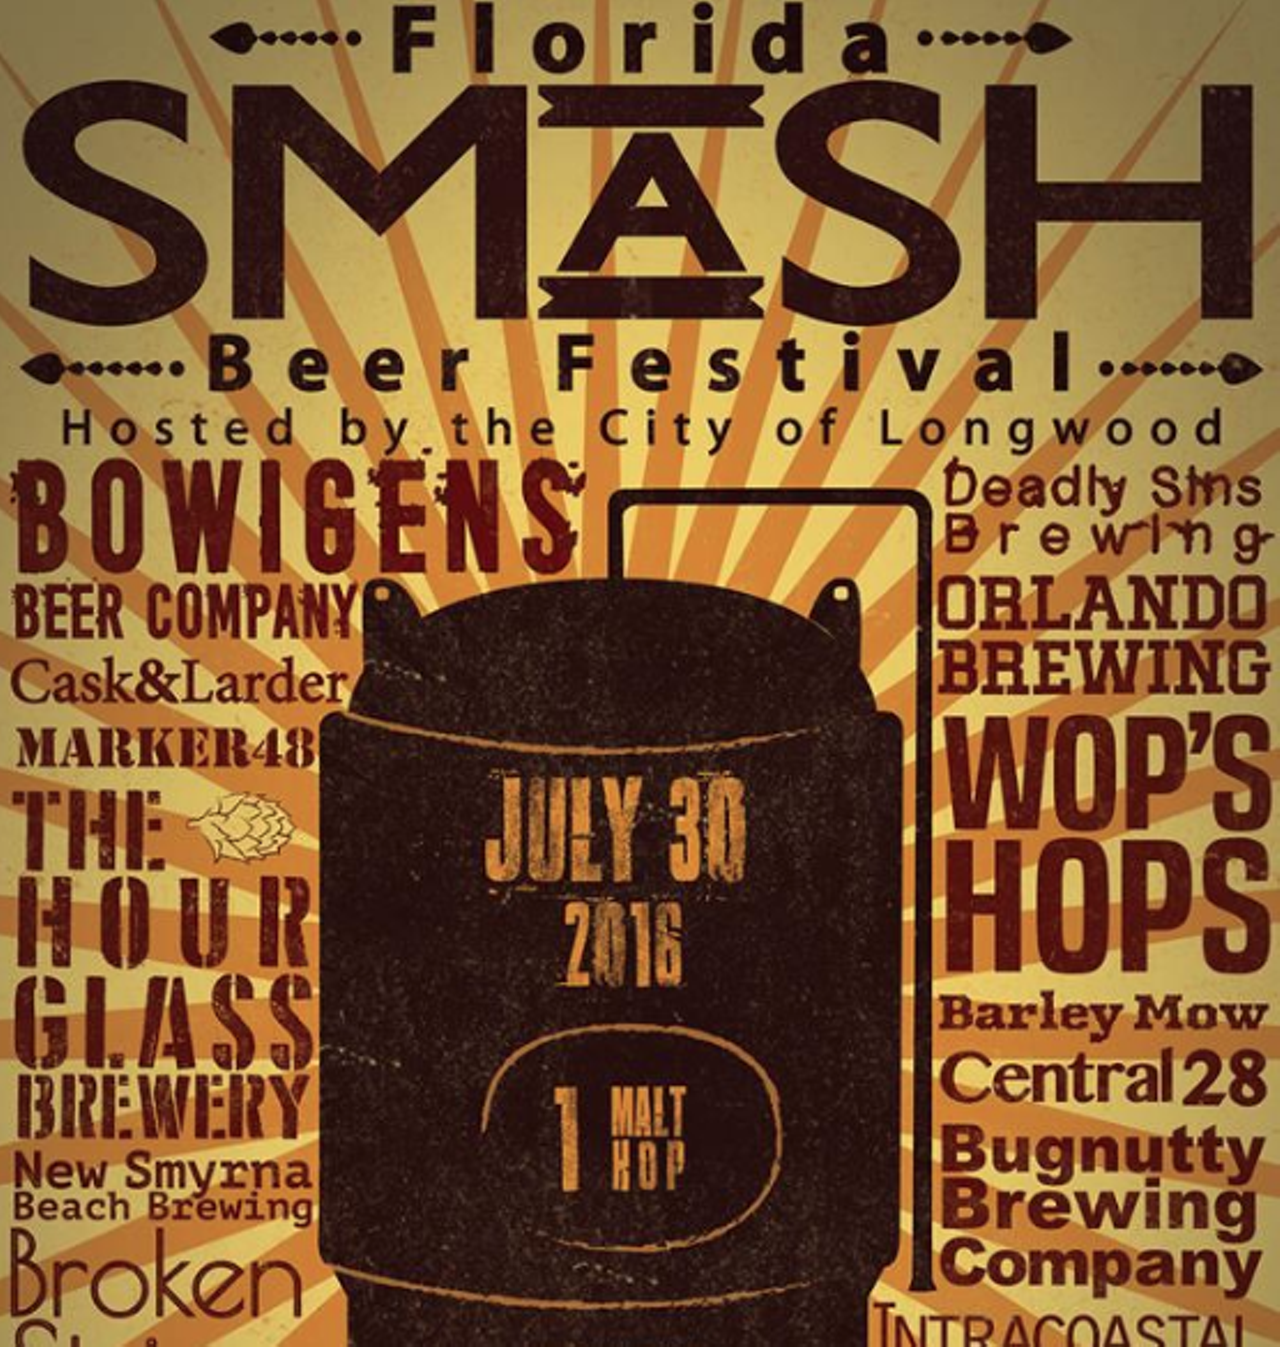 SMaSH Beer Festival
311 W. Warren Ave, Longwood, July 30, 1-5 p.m.
Created to show how creative Florida breweries could be, this festival is both an opportunity for them to give back and to think outside the box. The challenge is for each brewery to create a new beer from a single malt and a single hop. Tickets start at $30 and all proceeds go toward the Sharing Center. 
Photo via Florida SMaSH Beer Fest/Facebook